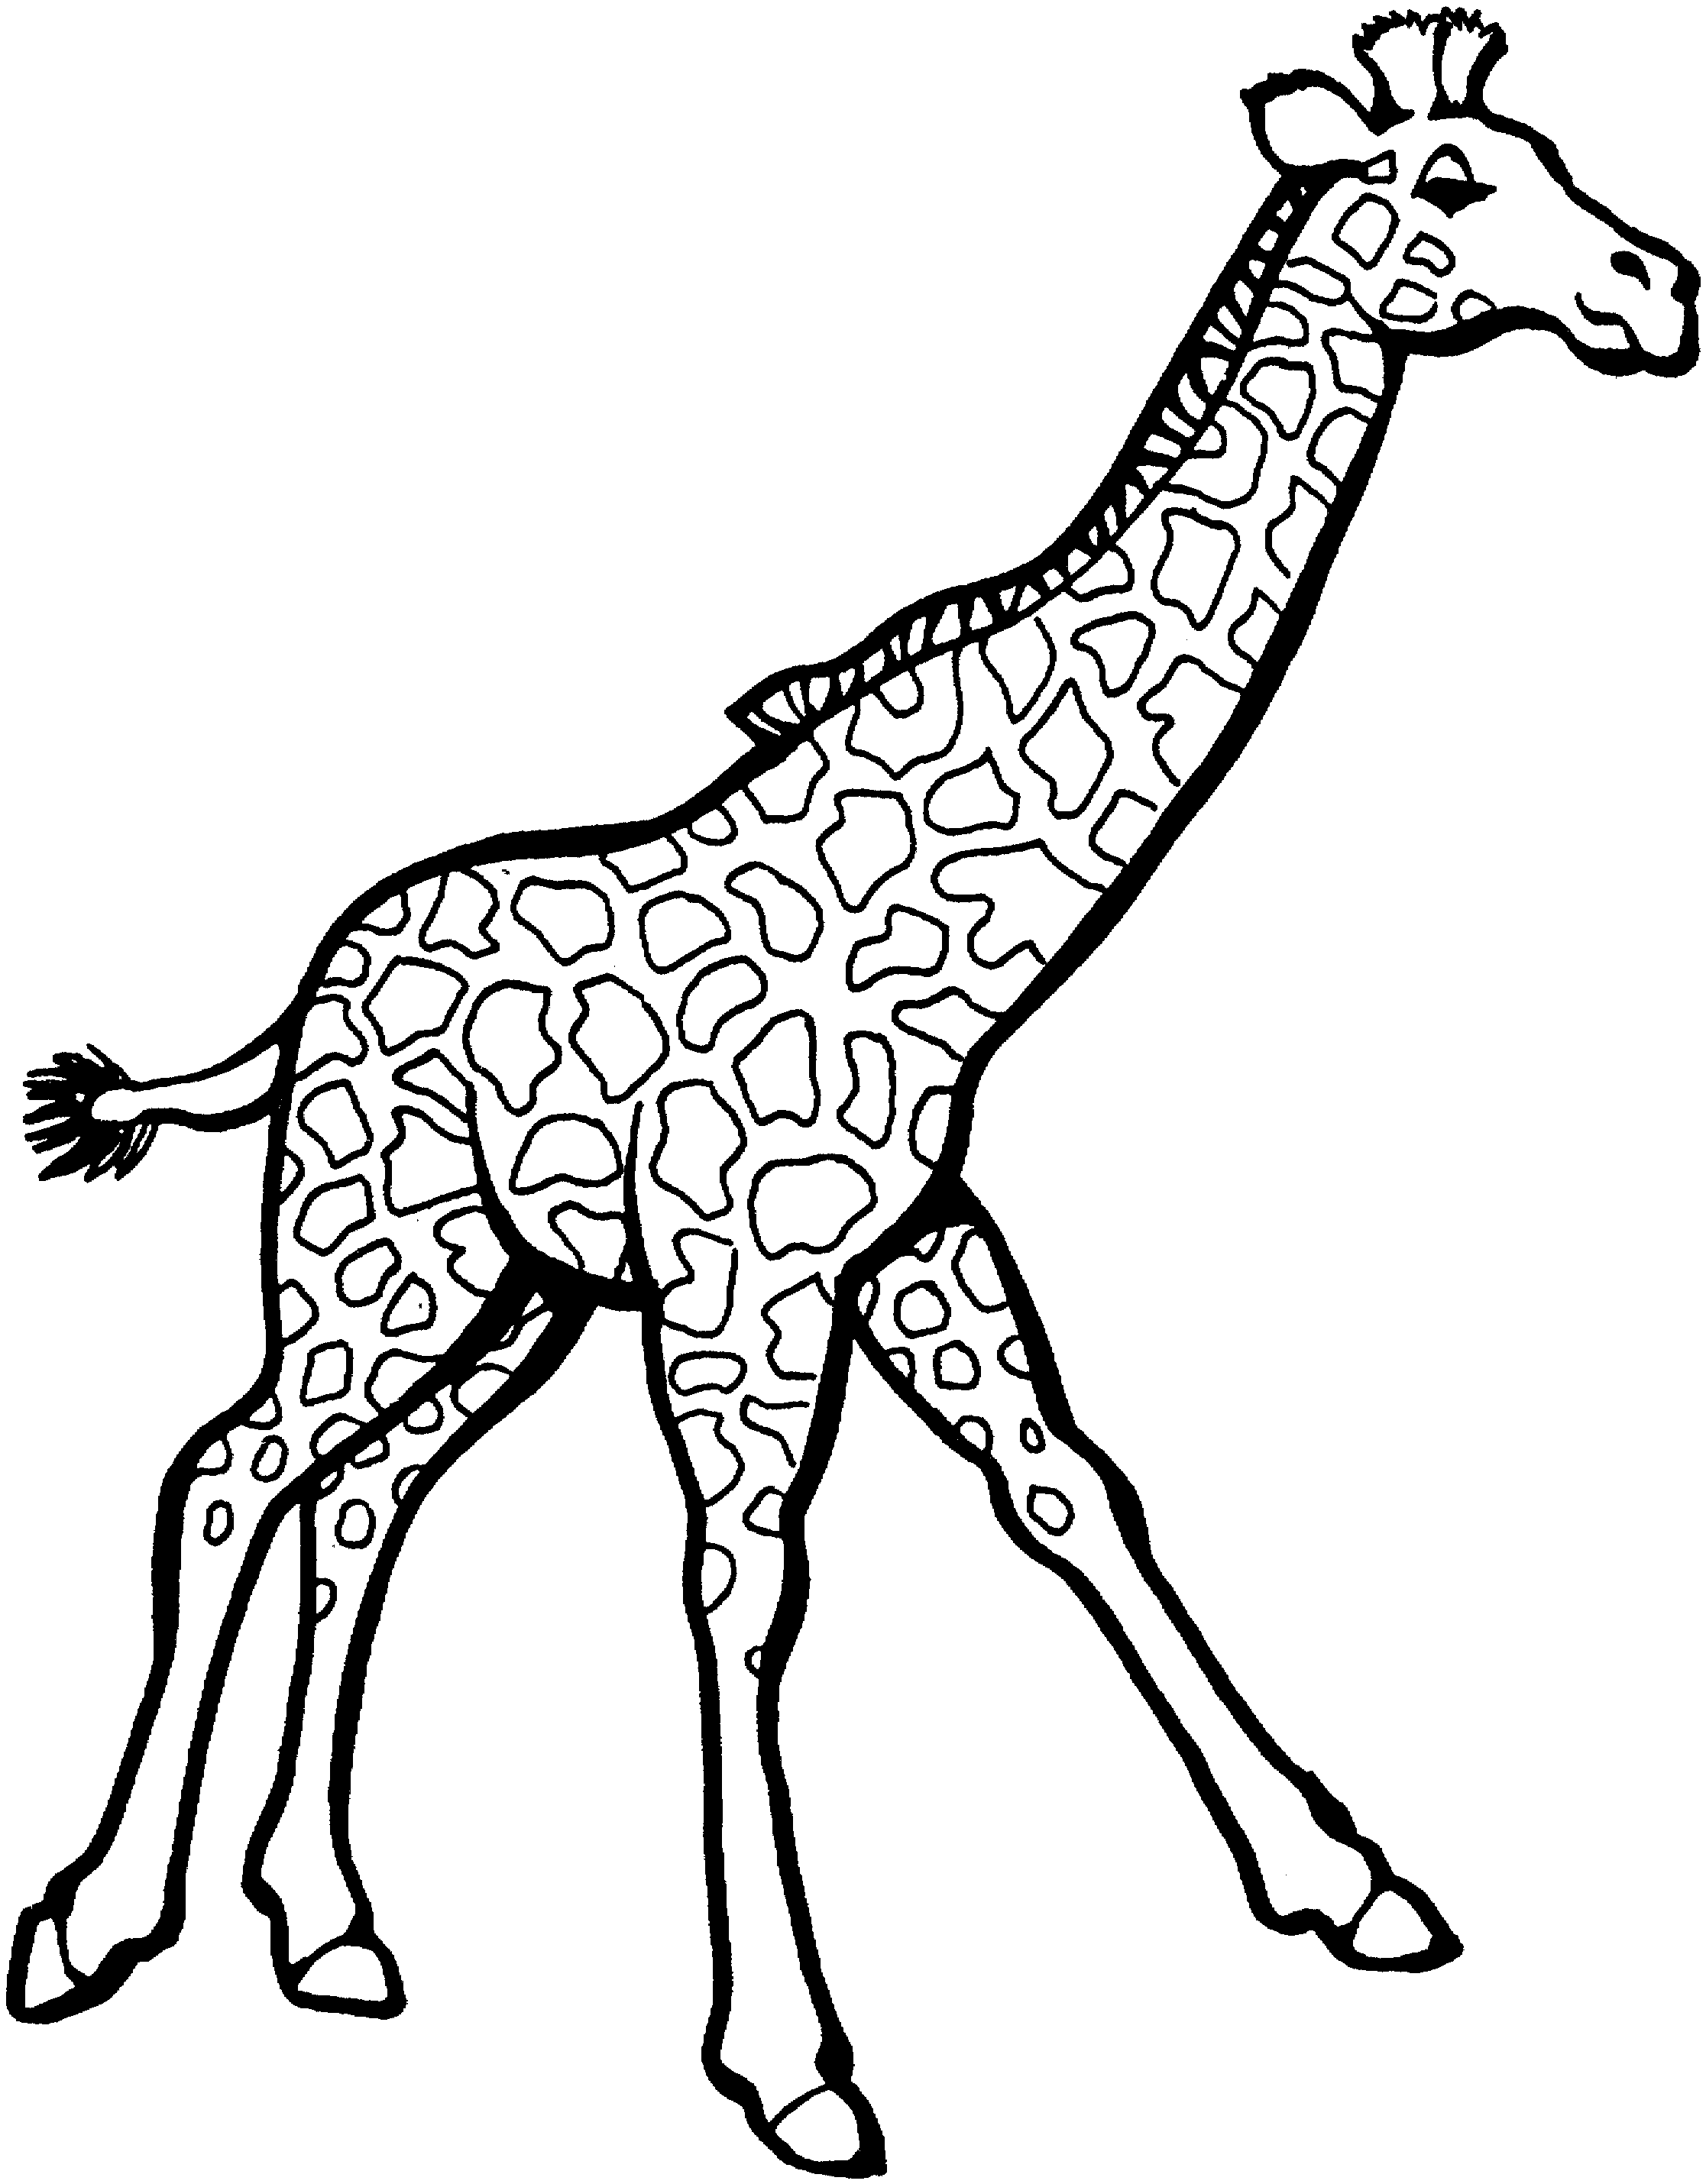 coloring pages of grassland animals grassland animals coloring pages coloring home grassland coloring animals pages of 